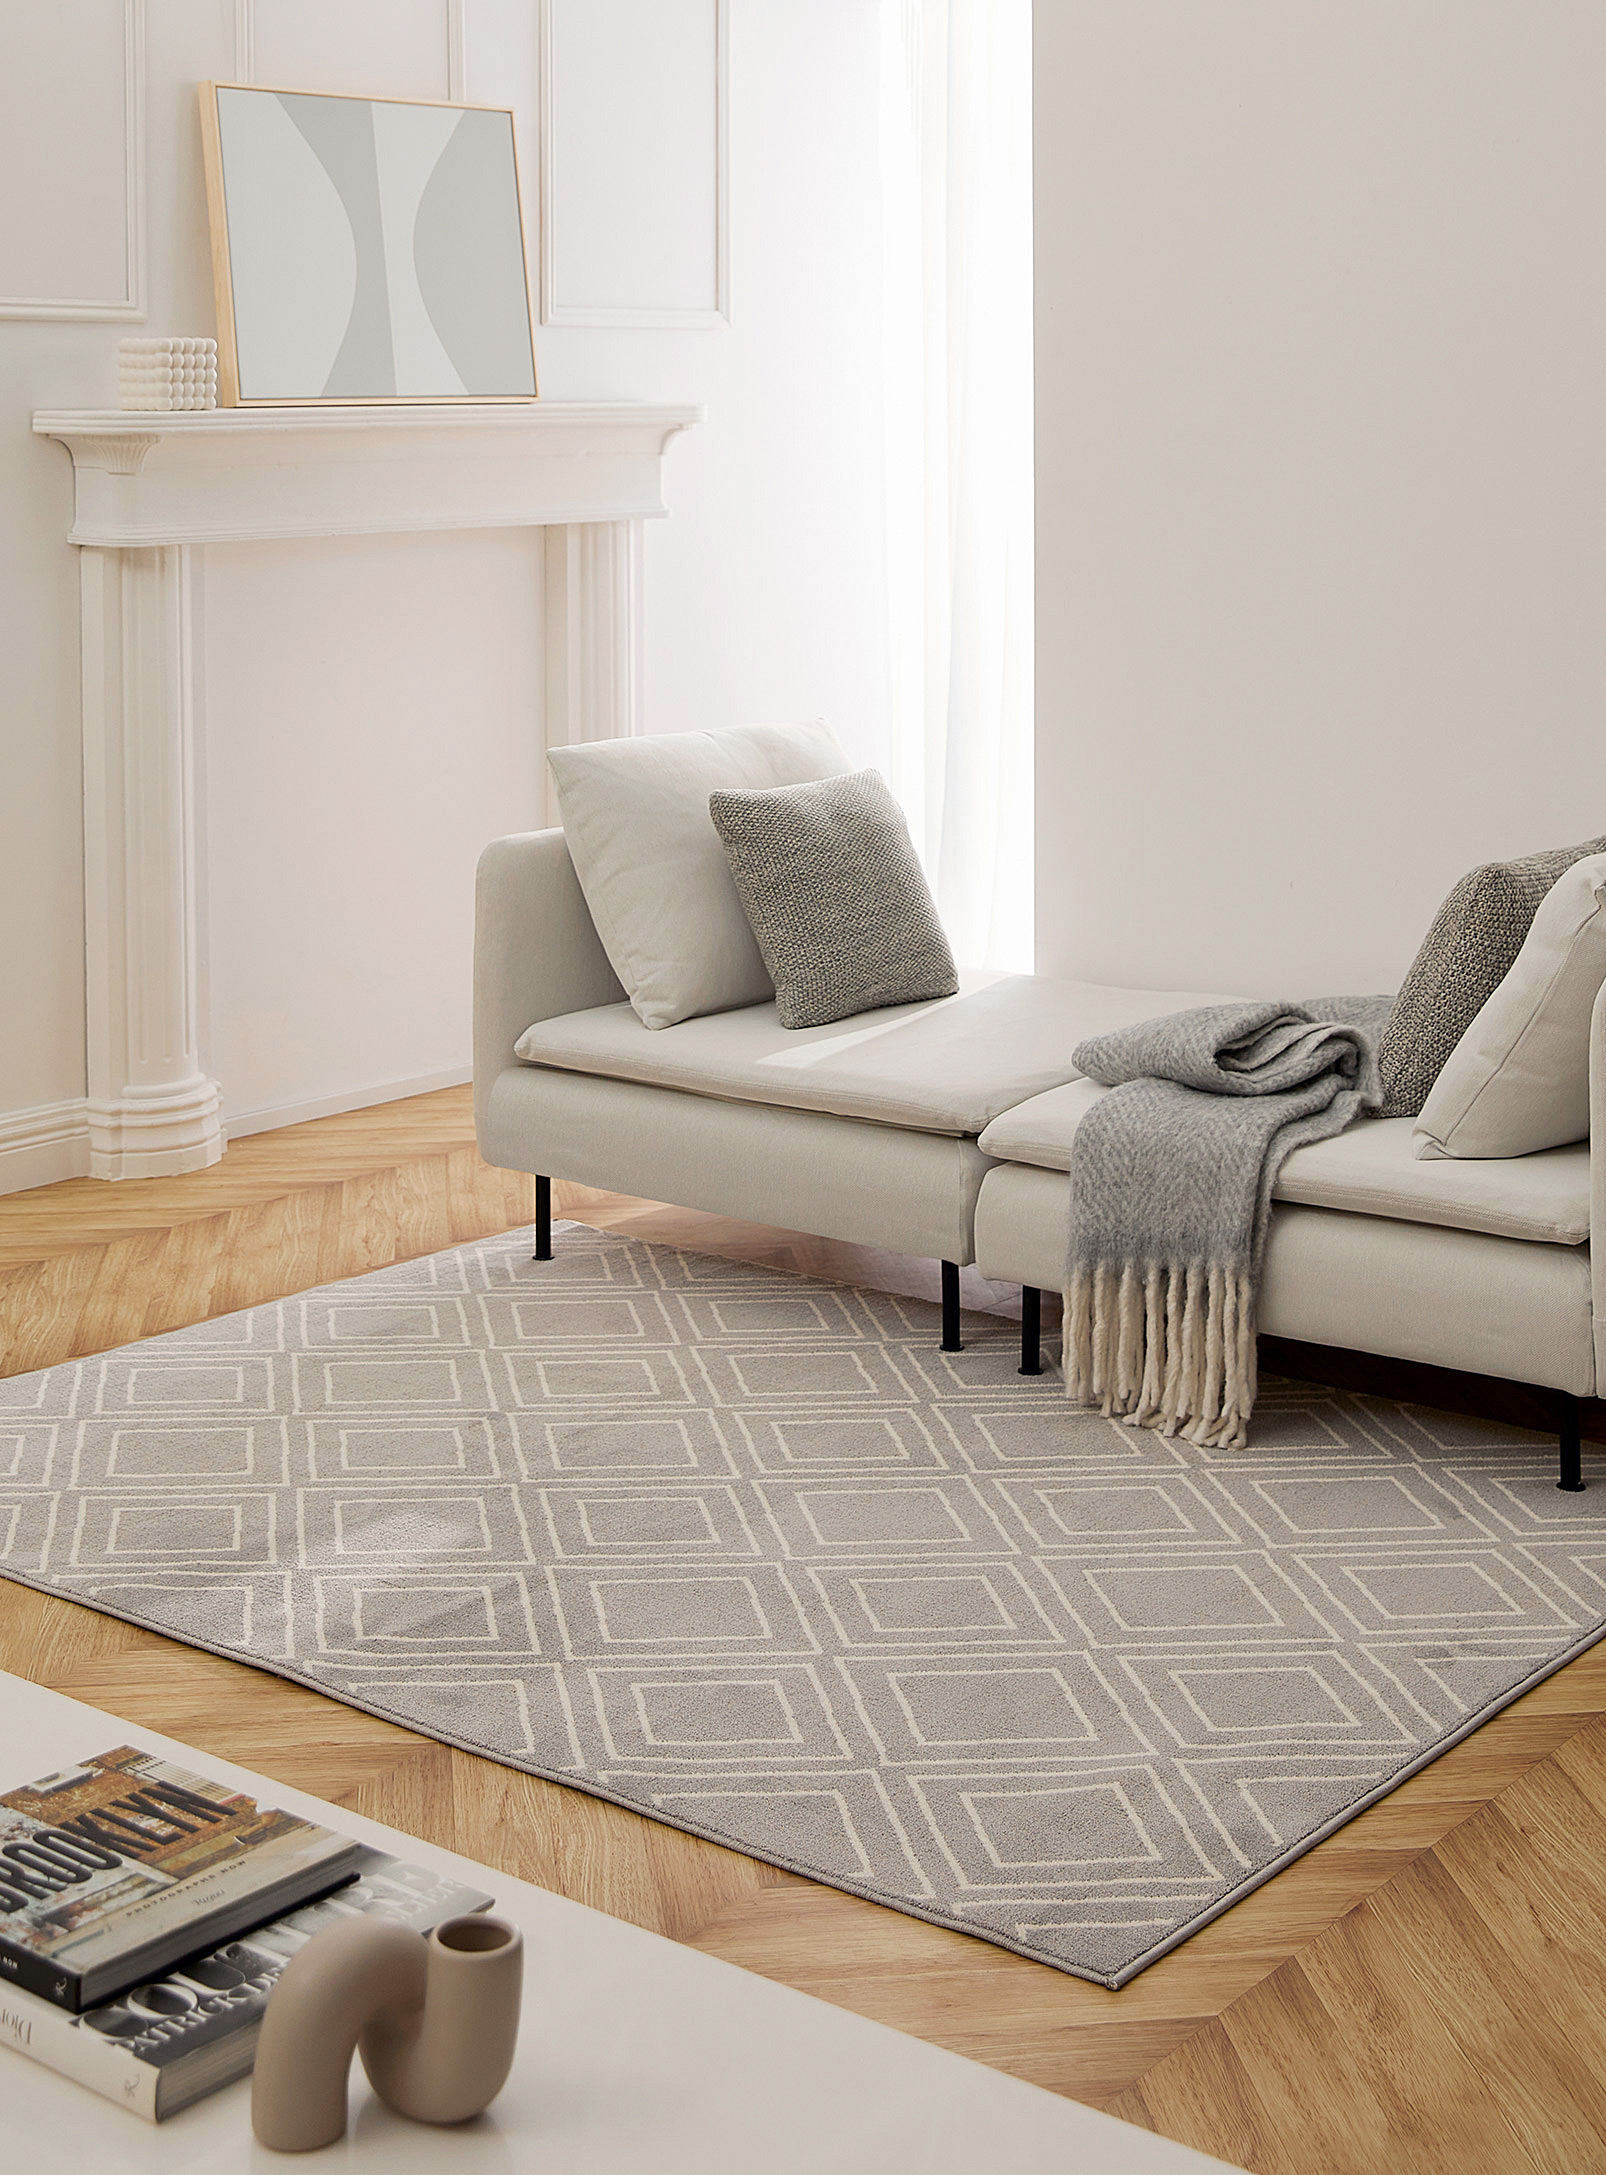 Simons Maison Sumptuous Diamond Pattern Rug See Available Sizes In Patterned Grey